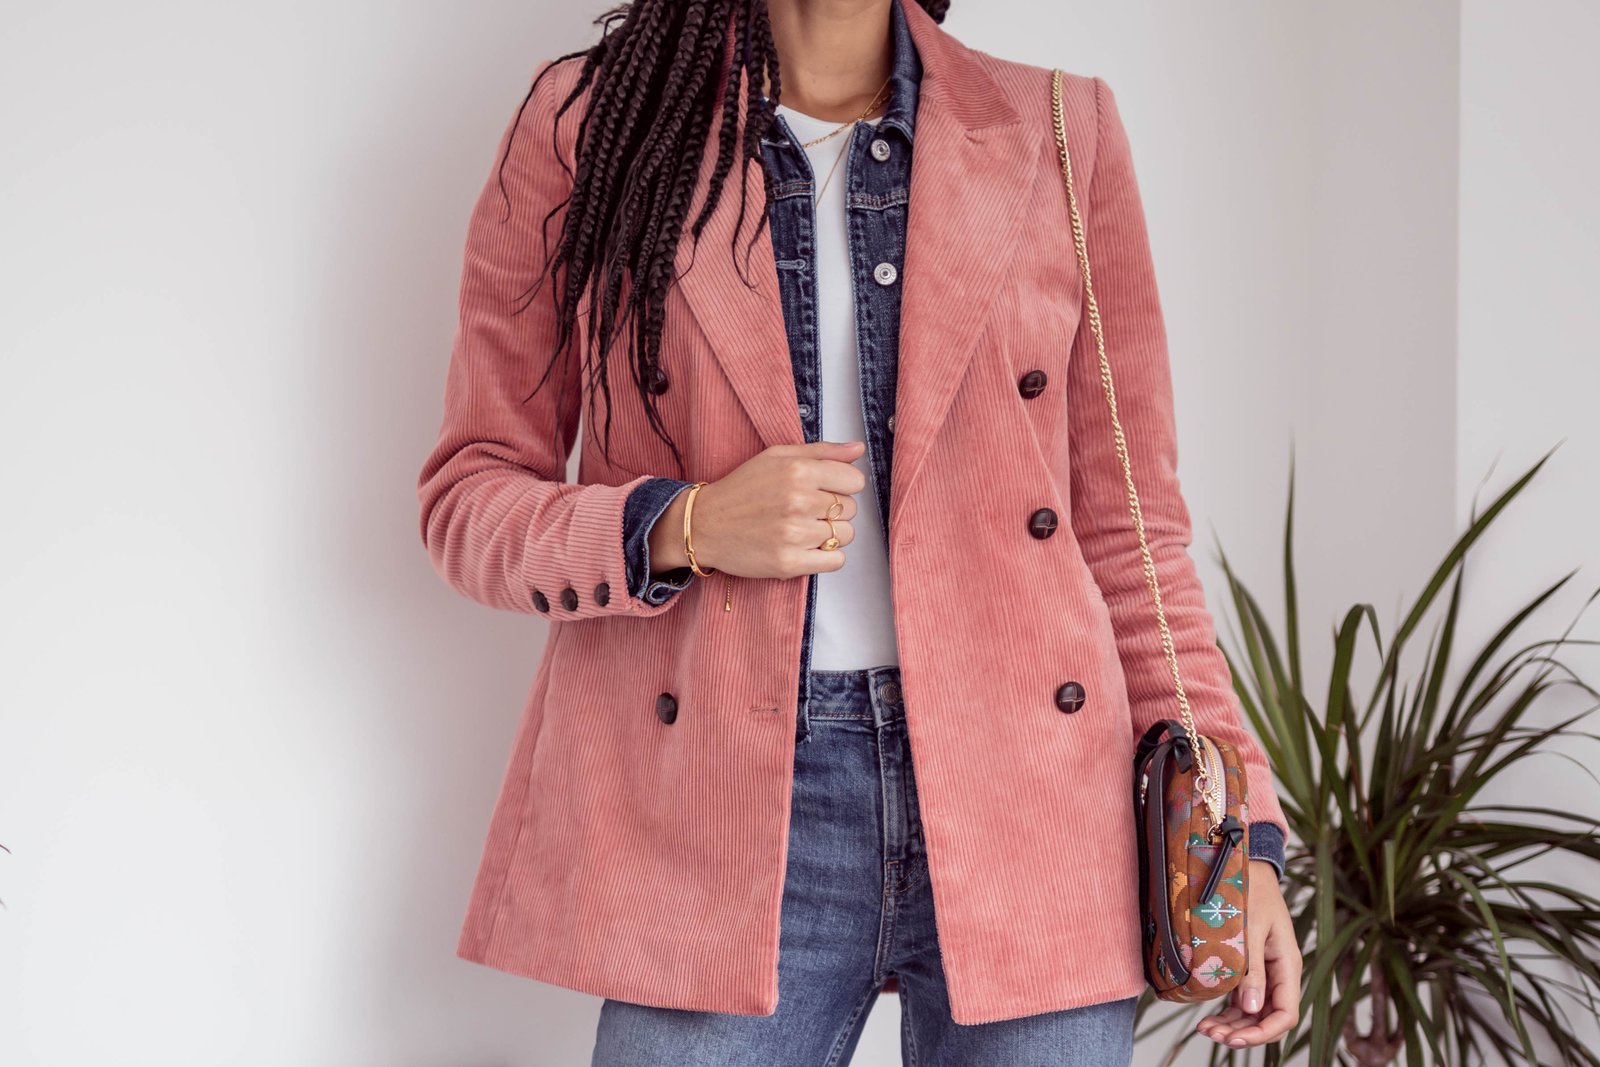 Samio double denim with pink and Other stories double breasted corduroy blazer transitional outfit Samio